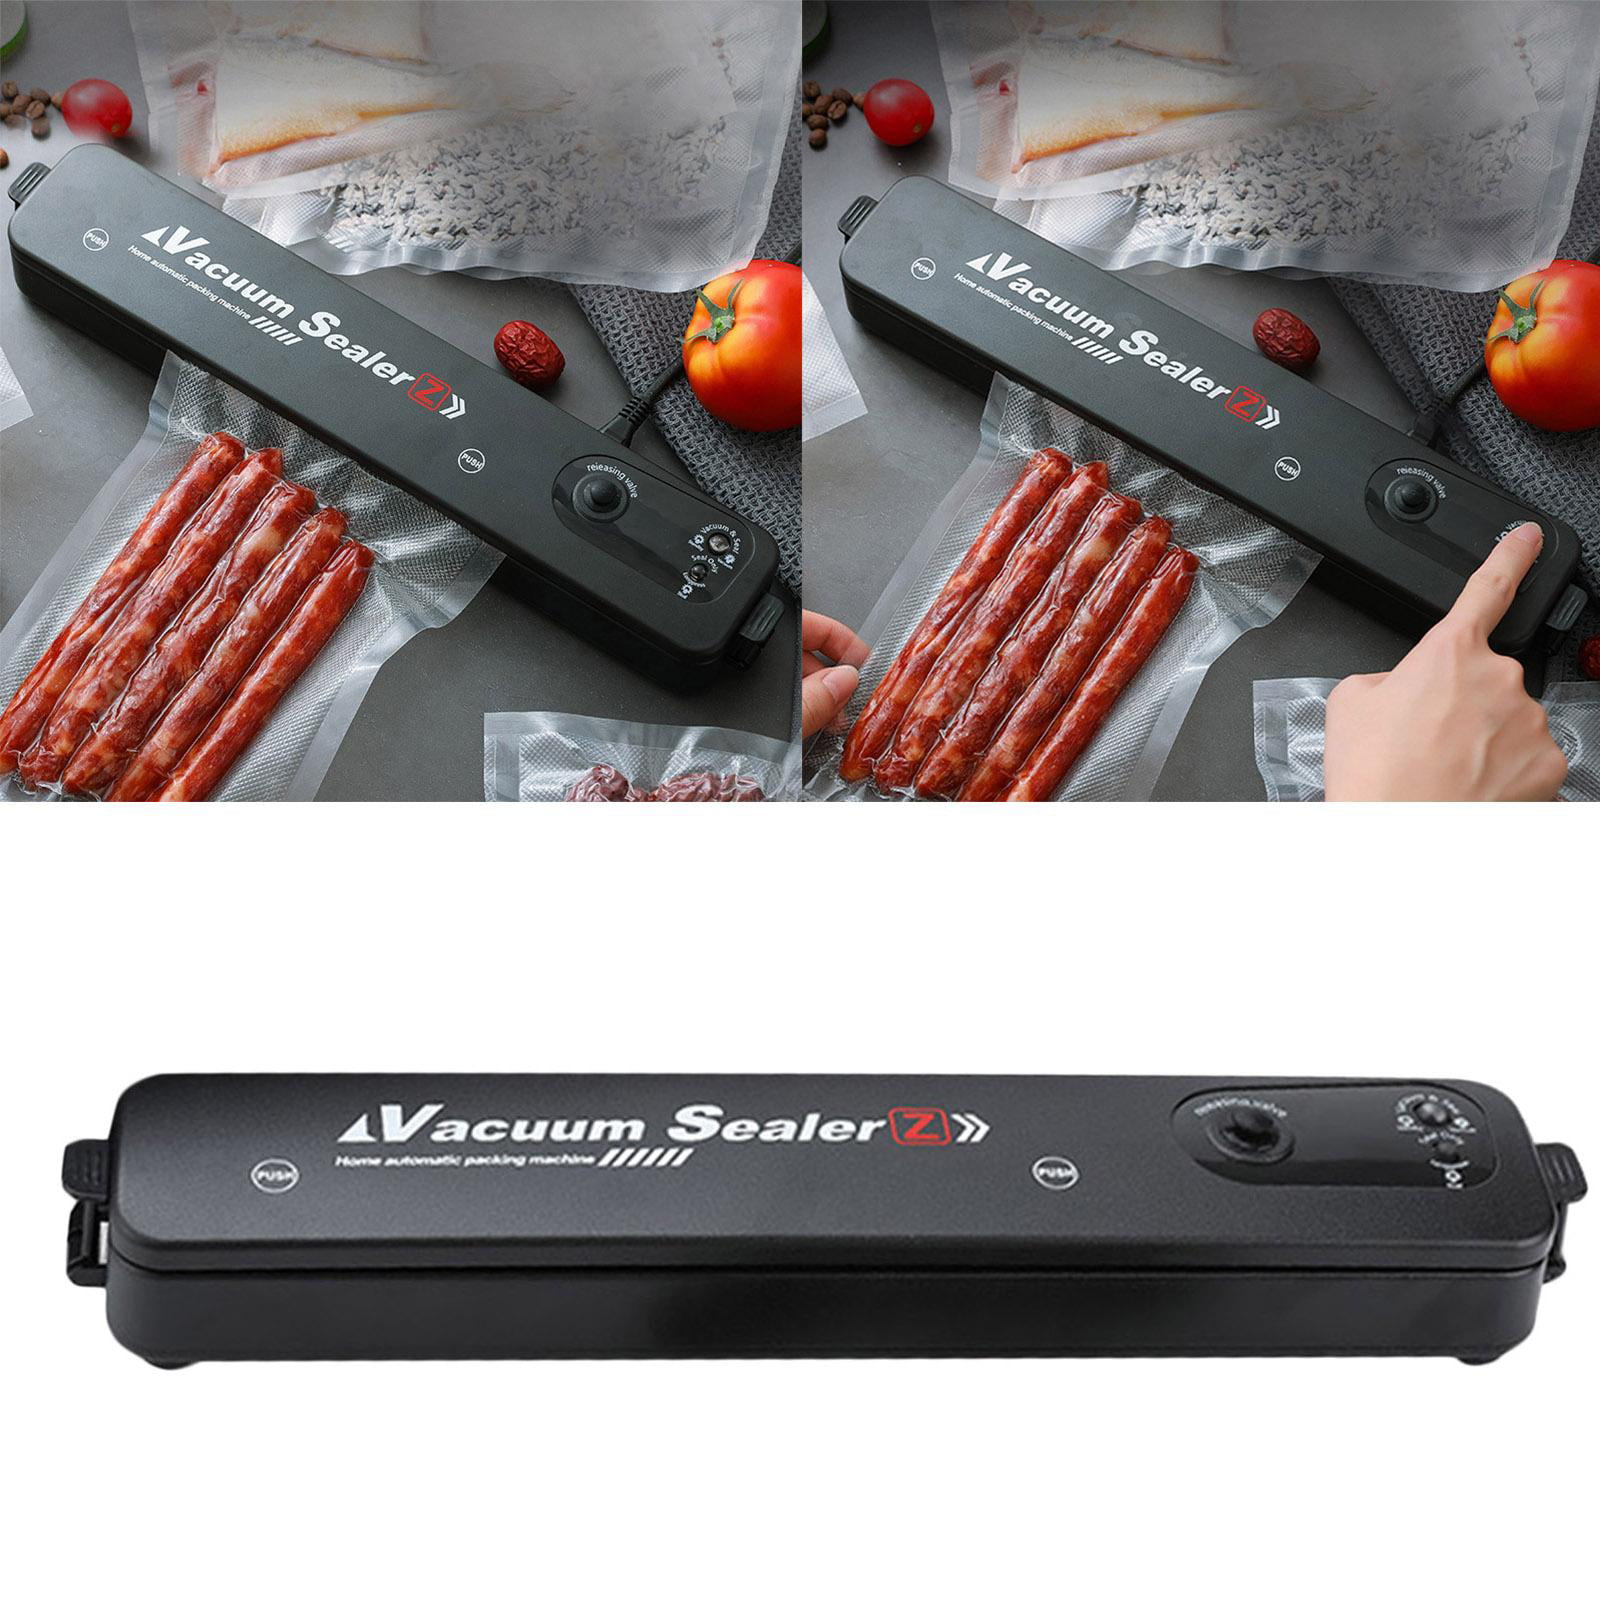 Details about   Electric Food Vacuum Sealer Vacuum Sealing Packing Machine Food Home Use 